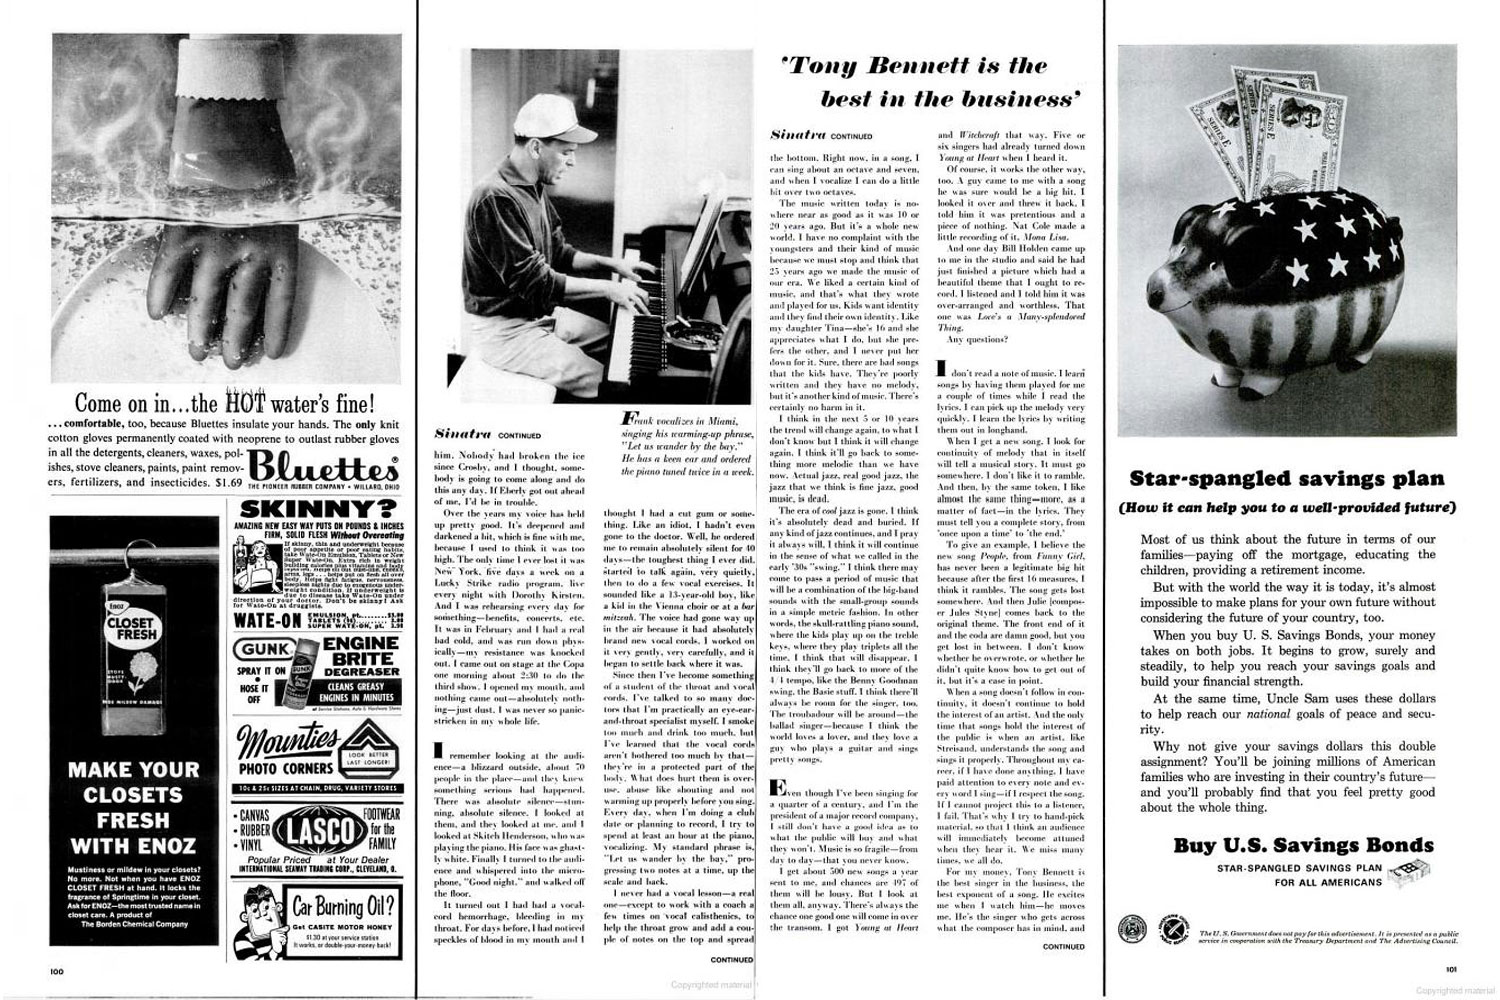 Page spreads for Frank Sinatra feature, LIFE magazine, April 23, 1965.